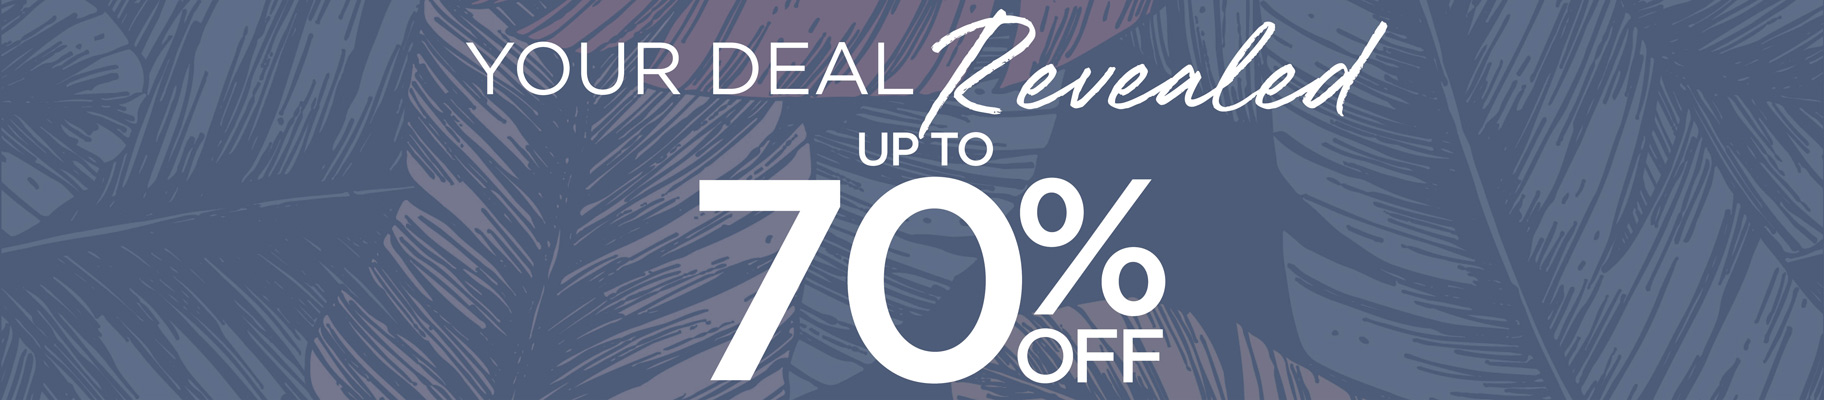 Your deal Revealed. UP TO 70% OFF